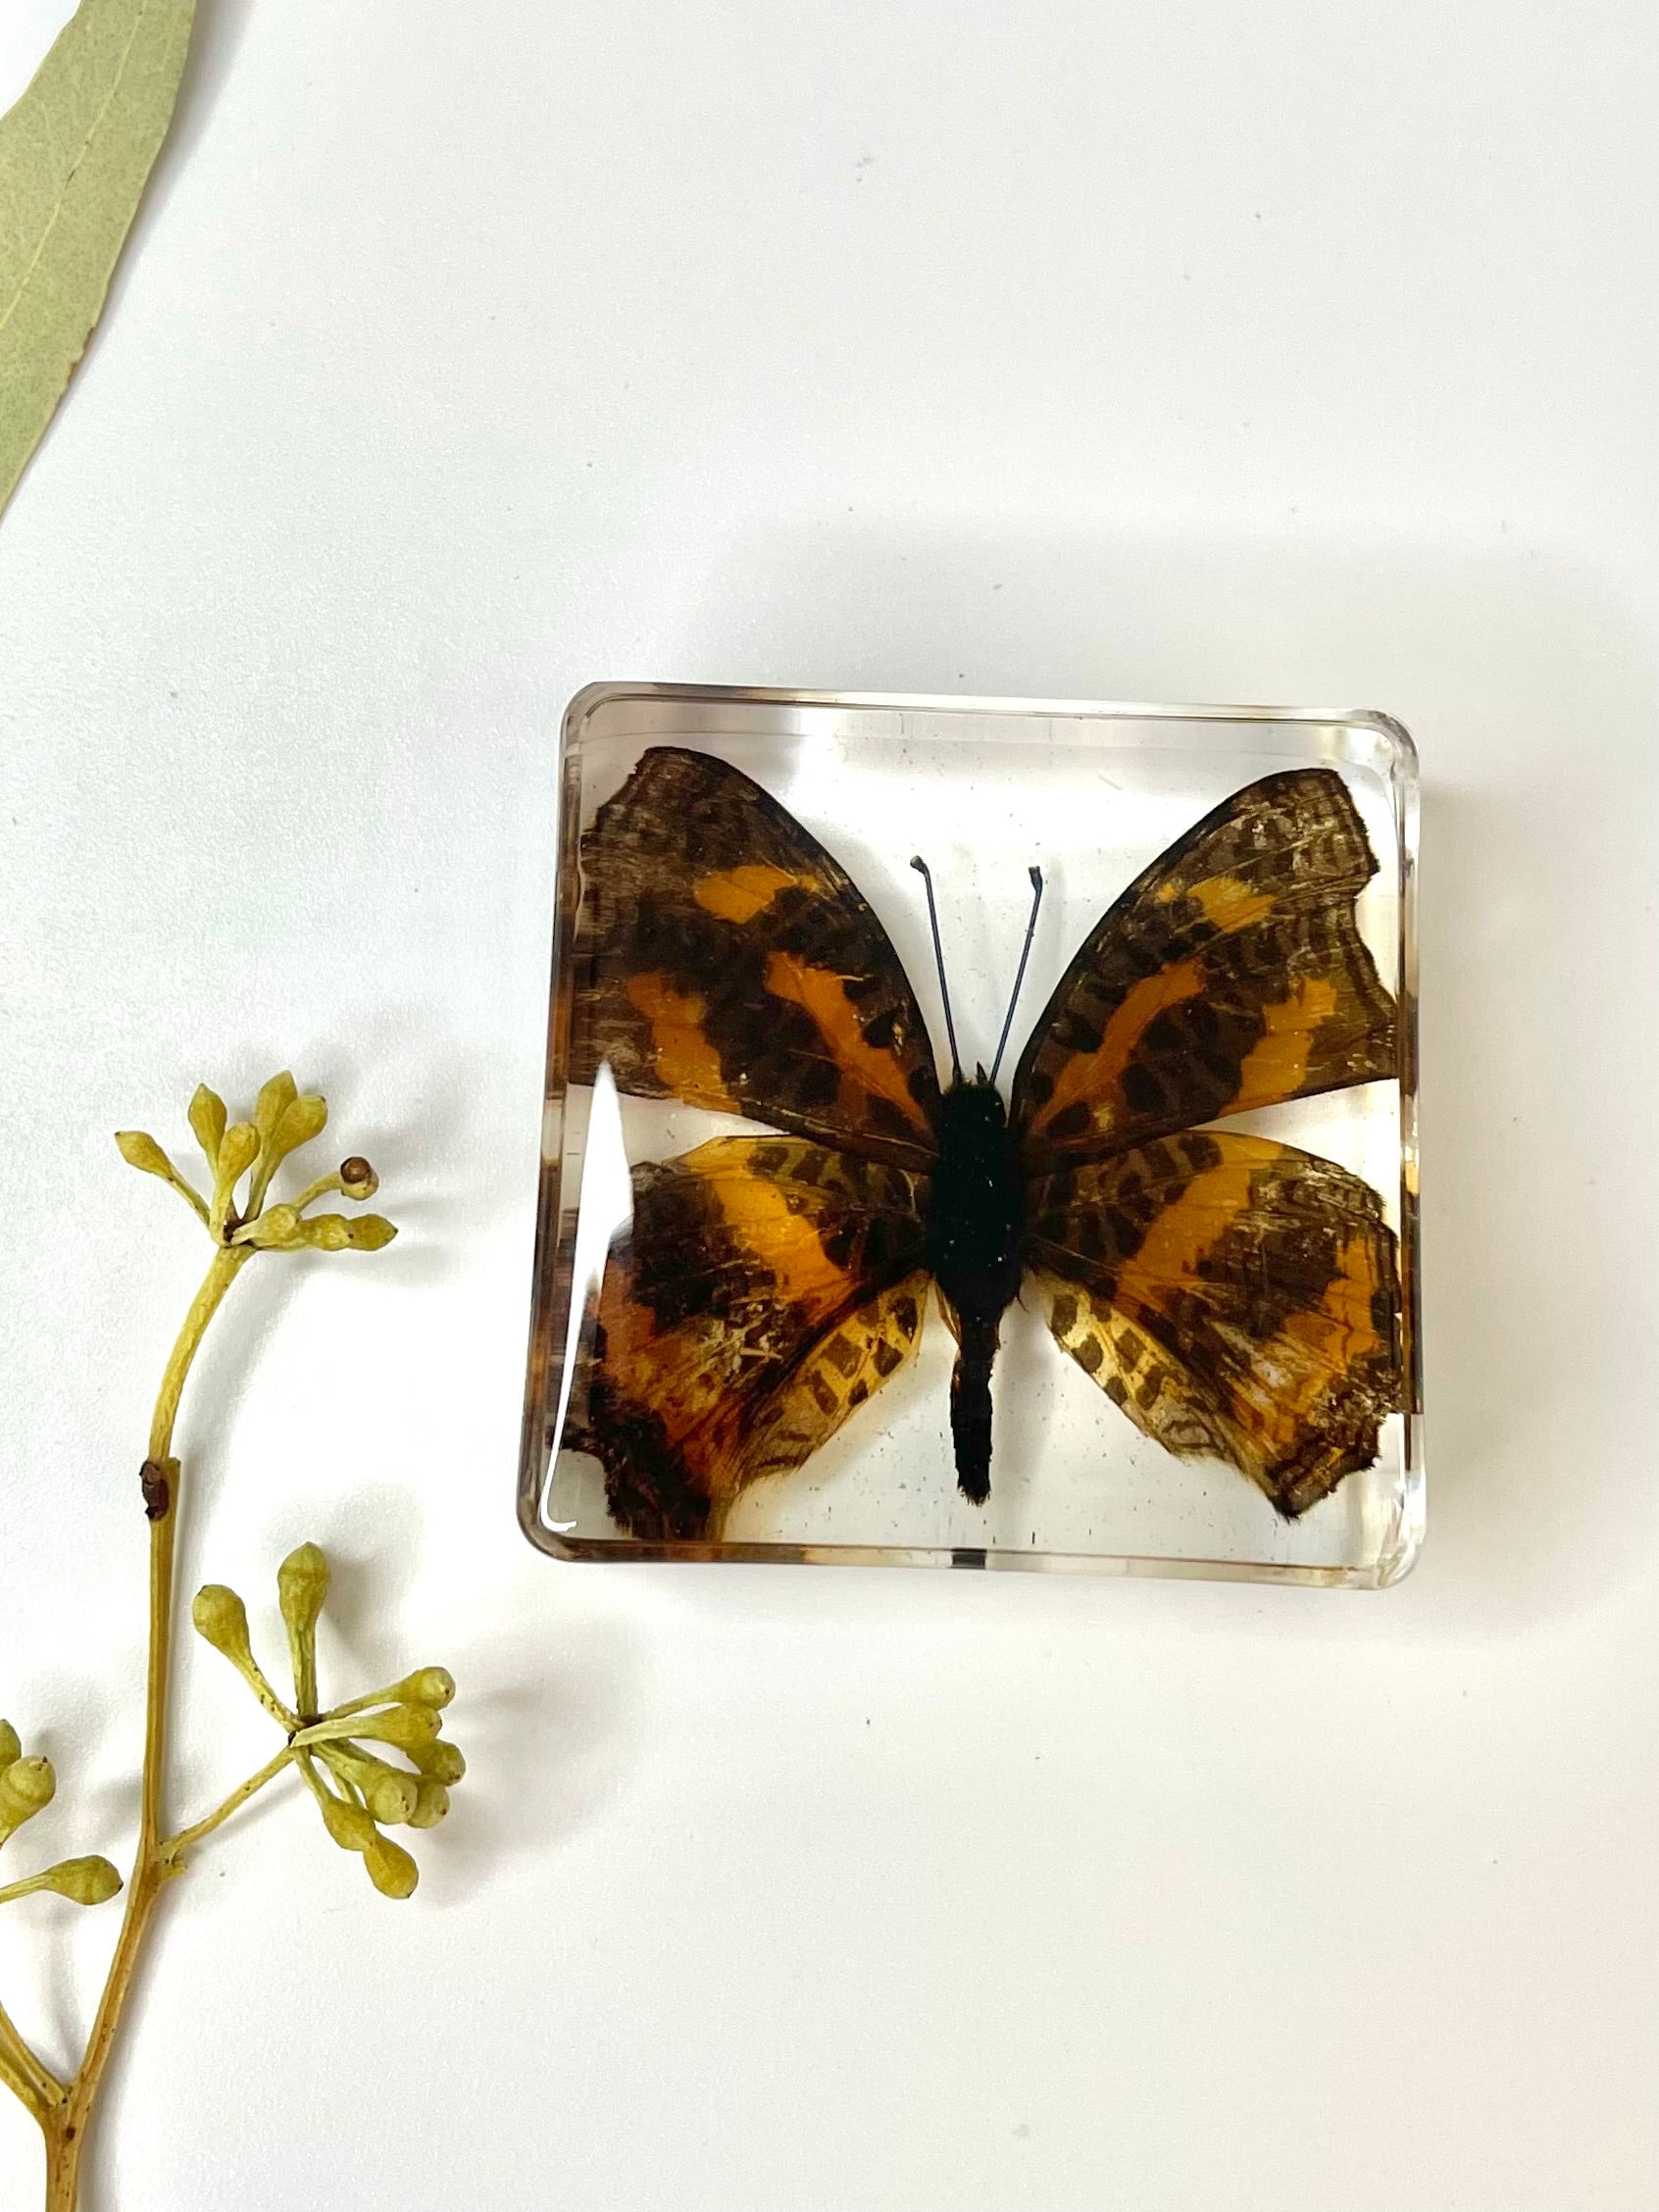 Animals Specimens Resin Blocks Bugs Butterfly Insect Fish Crab Specimens Toy - HAPPY GUMNUT